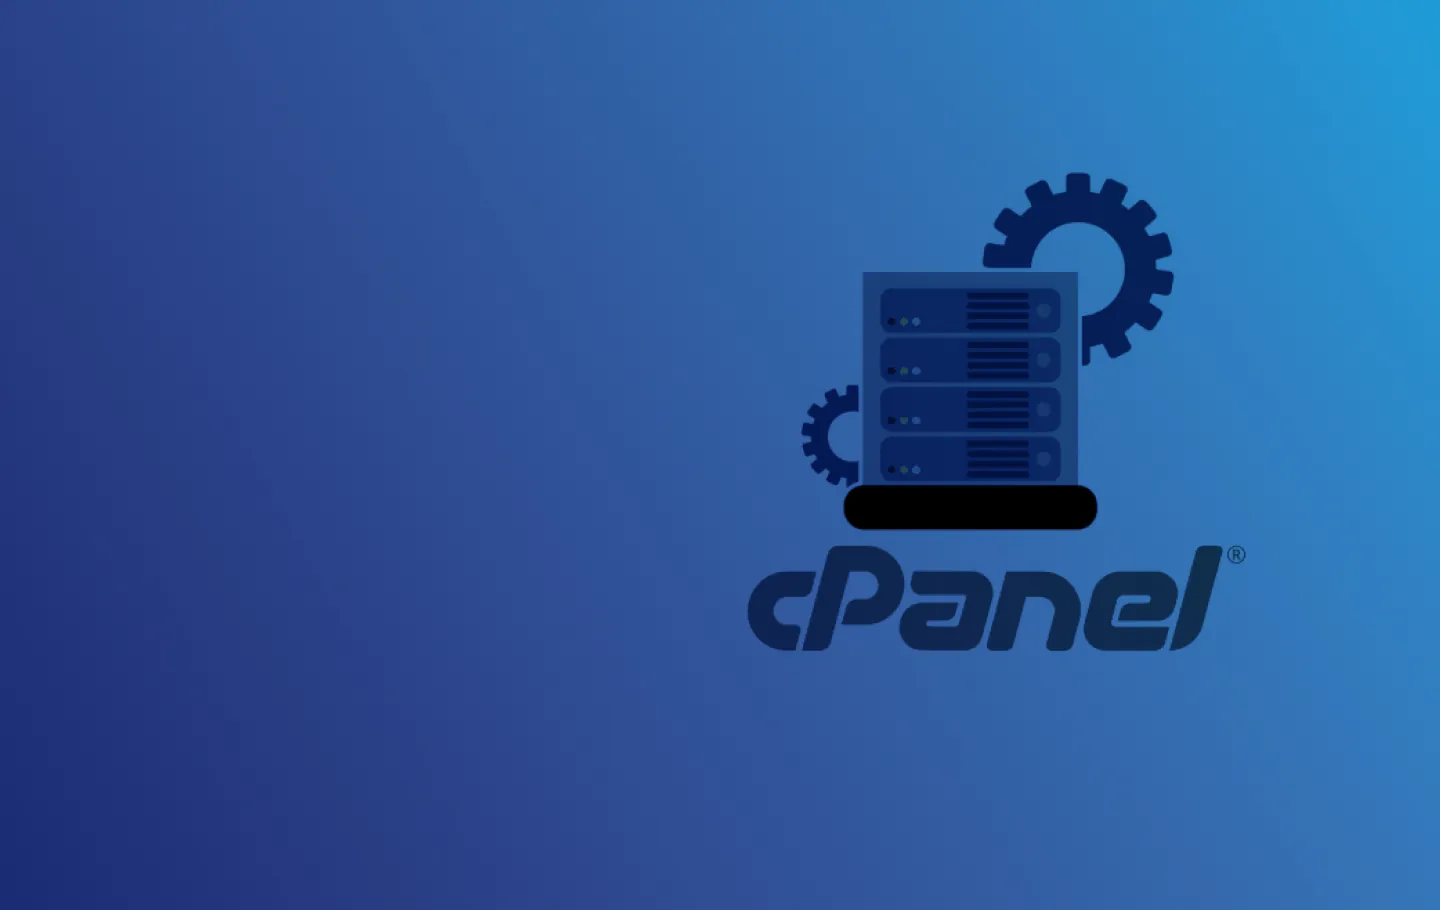 cPanel written on a blue background